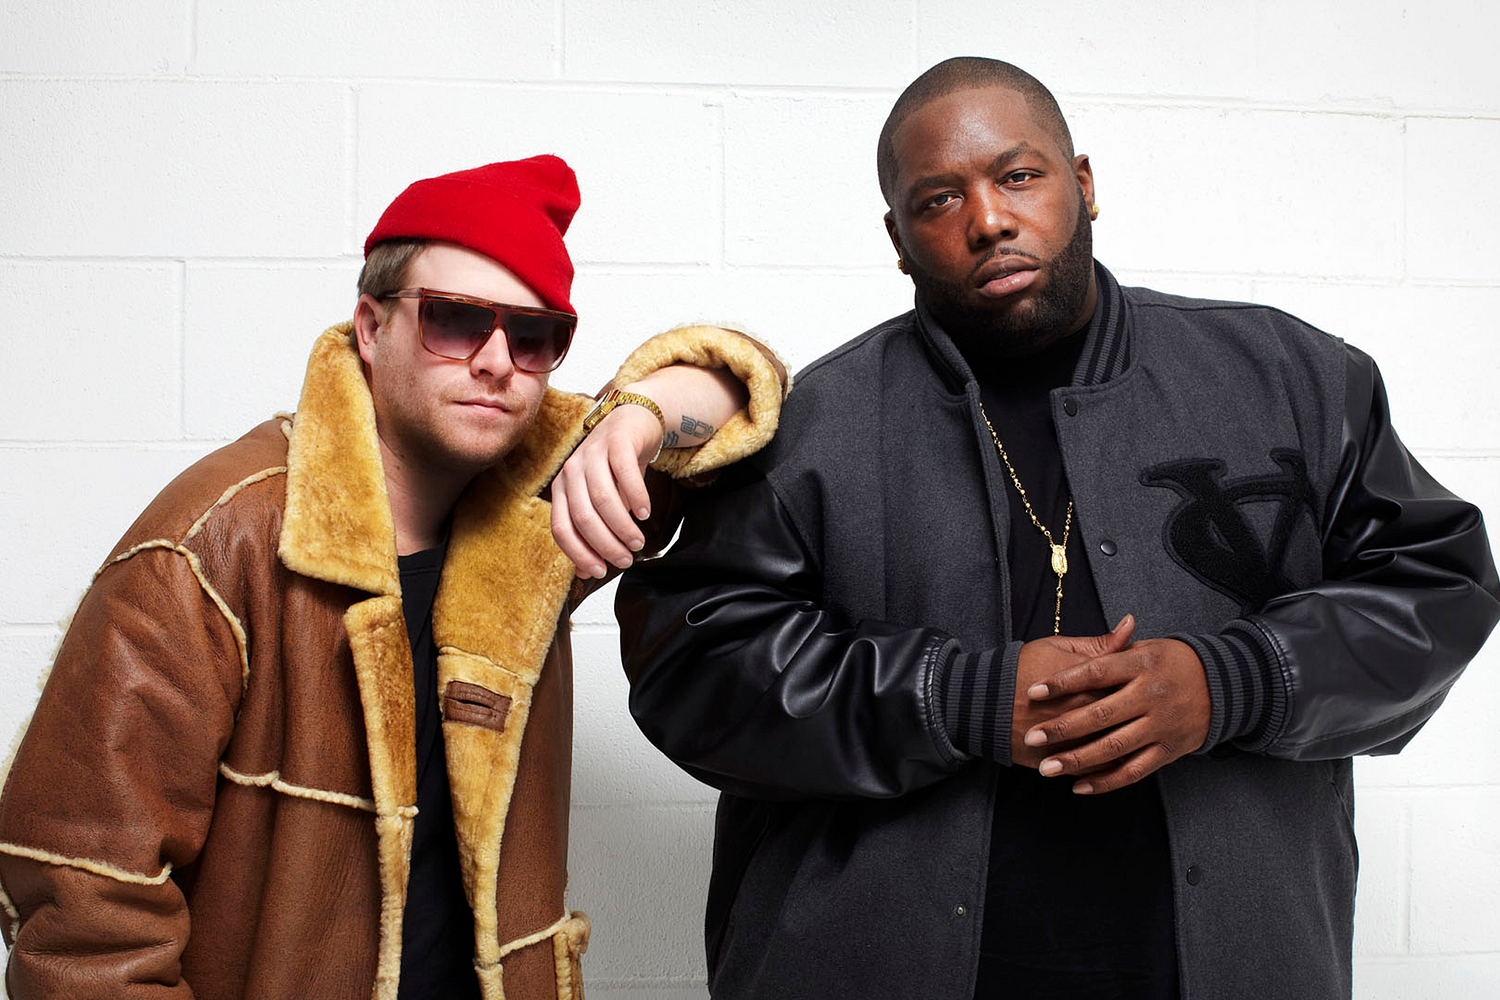 Run the Jewels, Mount Kimbie to play Outlook Festival in Croatia